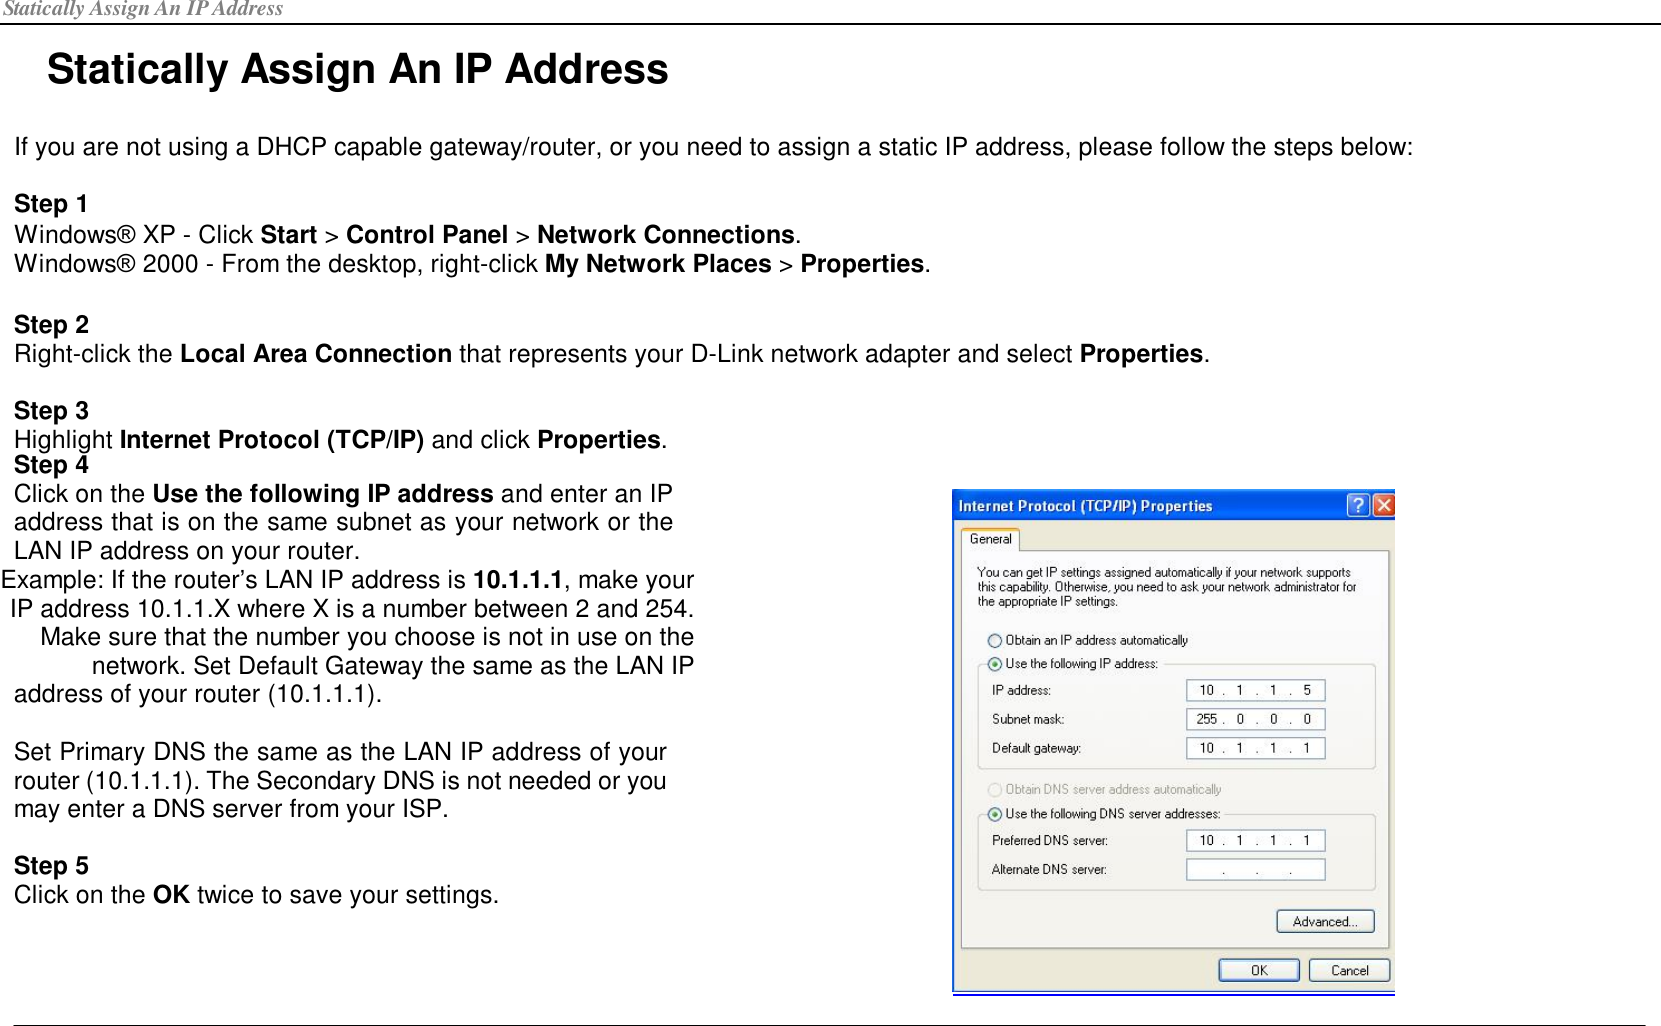 Statically Assign An IP Address Statically Assign An IP Address  If you are not using a DHCP capable gateway/router, or you need to assign a static IP address, please follow the steps below:  Step 1 Windows® XP - Click Start &gt; Control Panel &gt; Network Connections. Windows® 2000 - From the desktop, right-click My Network Places &gt; Properties.   Step 2 Right-click the Local Area Connection that represents your D-Link network adapter and select Properties.  Step 3 Highlight Internet Protocol (TCP/IP) and click Properties. Step 4 Click on the Use the following IP address and enter an IP address that is on the same subnet as your network or the LAN IP address on your router. Example: If the router’s LAN IP address is 10.1.1.1, make your IP address 10.1.1.X where X is a number between 2 and 254. Make sure that the number you choose is not in use on the network. Set Default Gateway the same as the LAN IP address of your router (10.1.1.1).  Set Primary DNS the same as the LAN IP address of your router (10.1.1.1). The Secondary DNS is not needed or you may enter a DNS server from your ISP.  Step 5 Click on the OK twice to save your settings.  